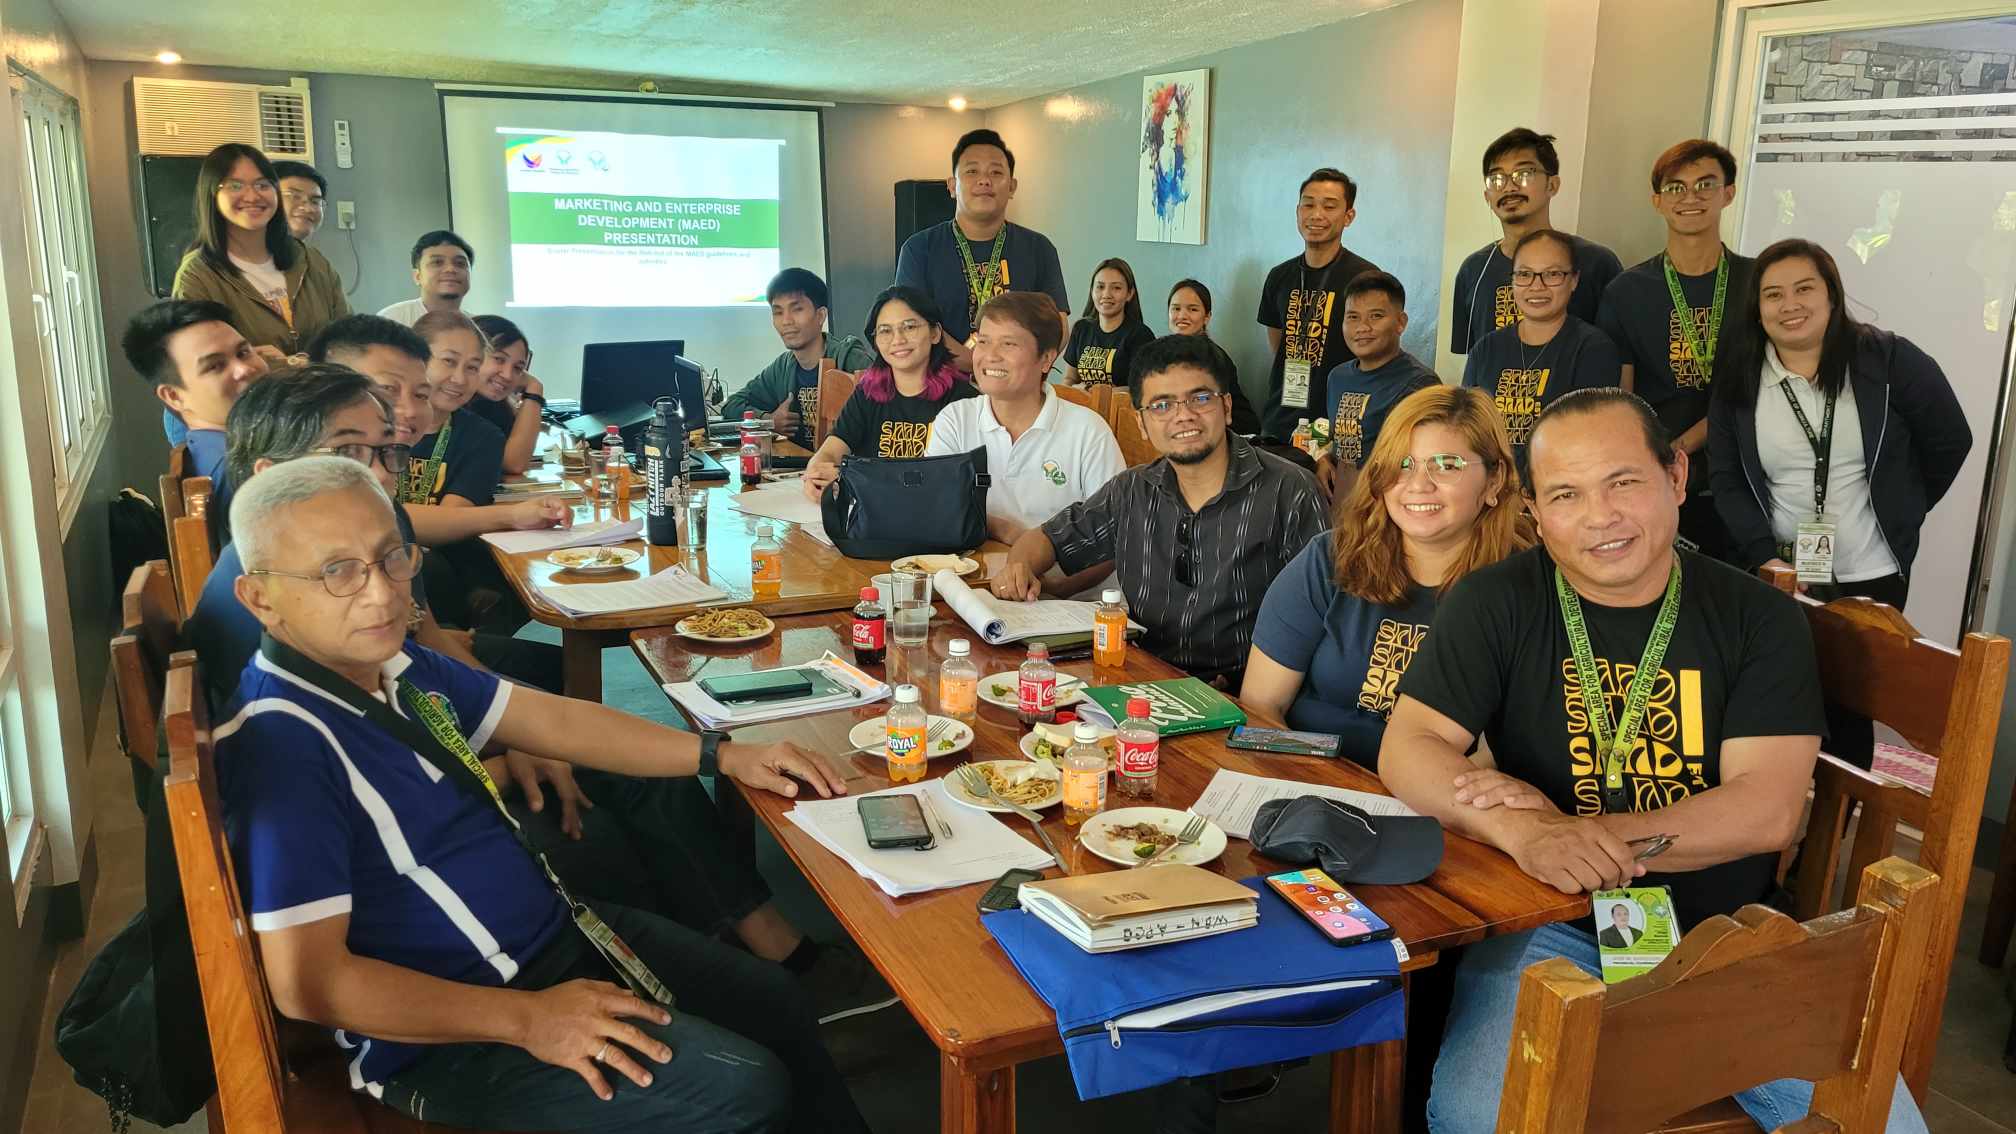 SAAD NPMO rolls out MAED guidelines to Bicol implementers